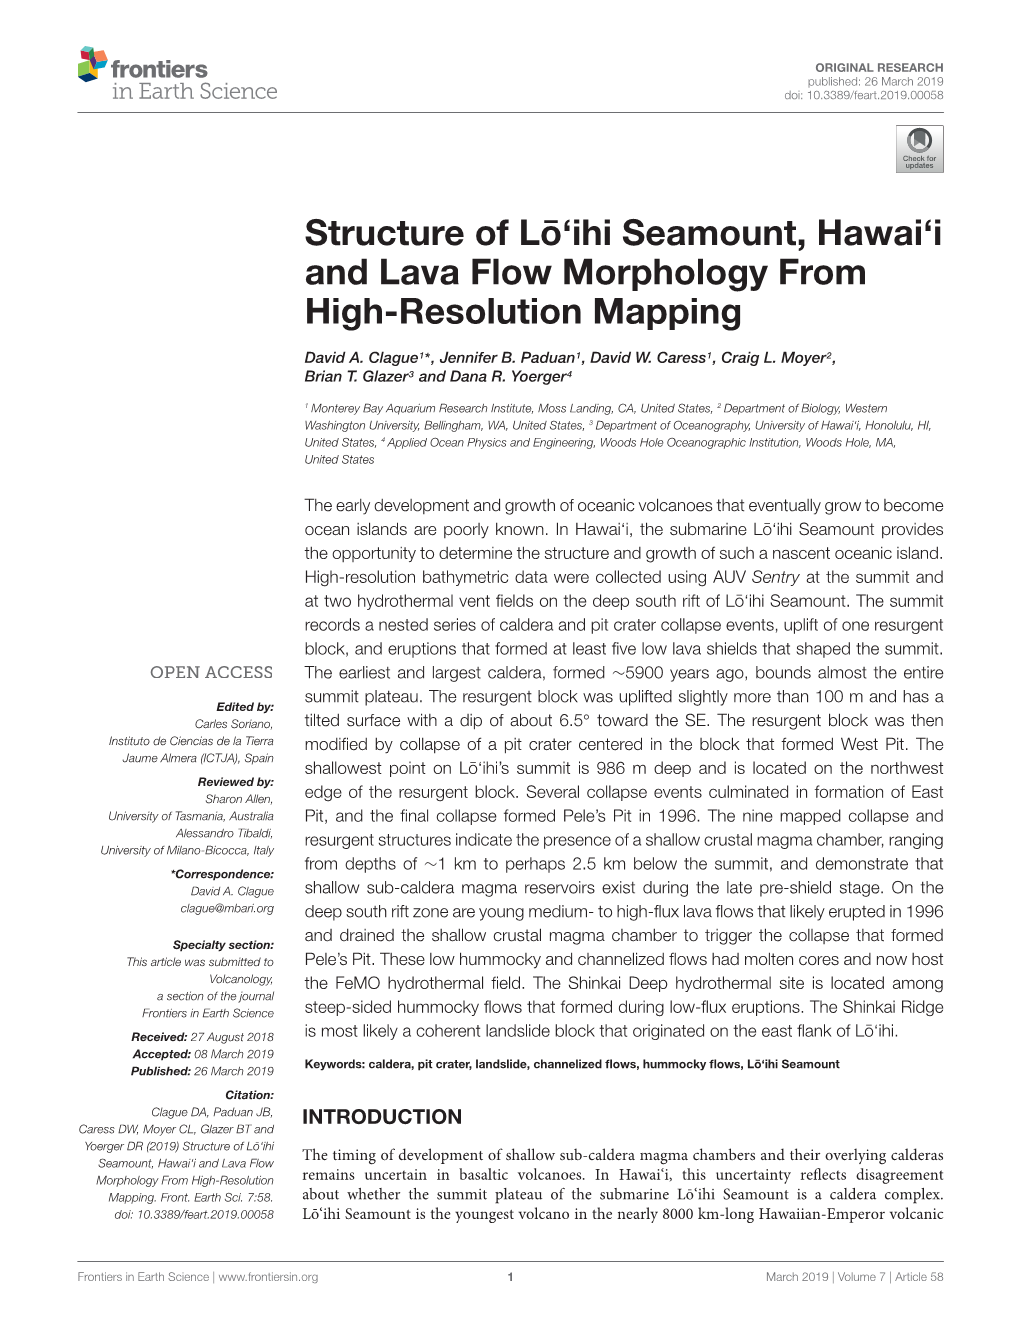 Structure of Lō'ihi Seamount, Hawai'i and Lava Flow Morphology from High-Resolution Mapping